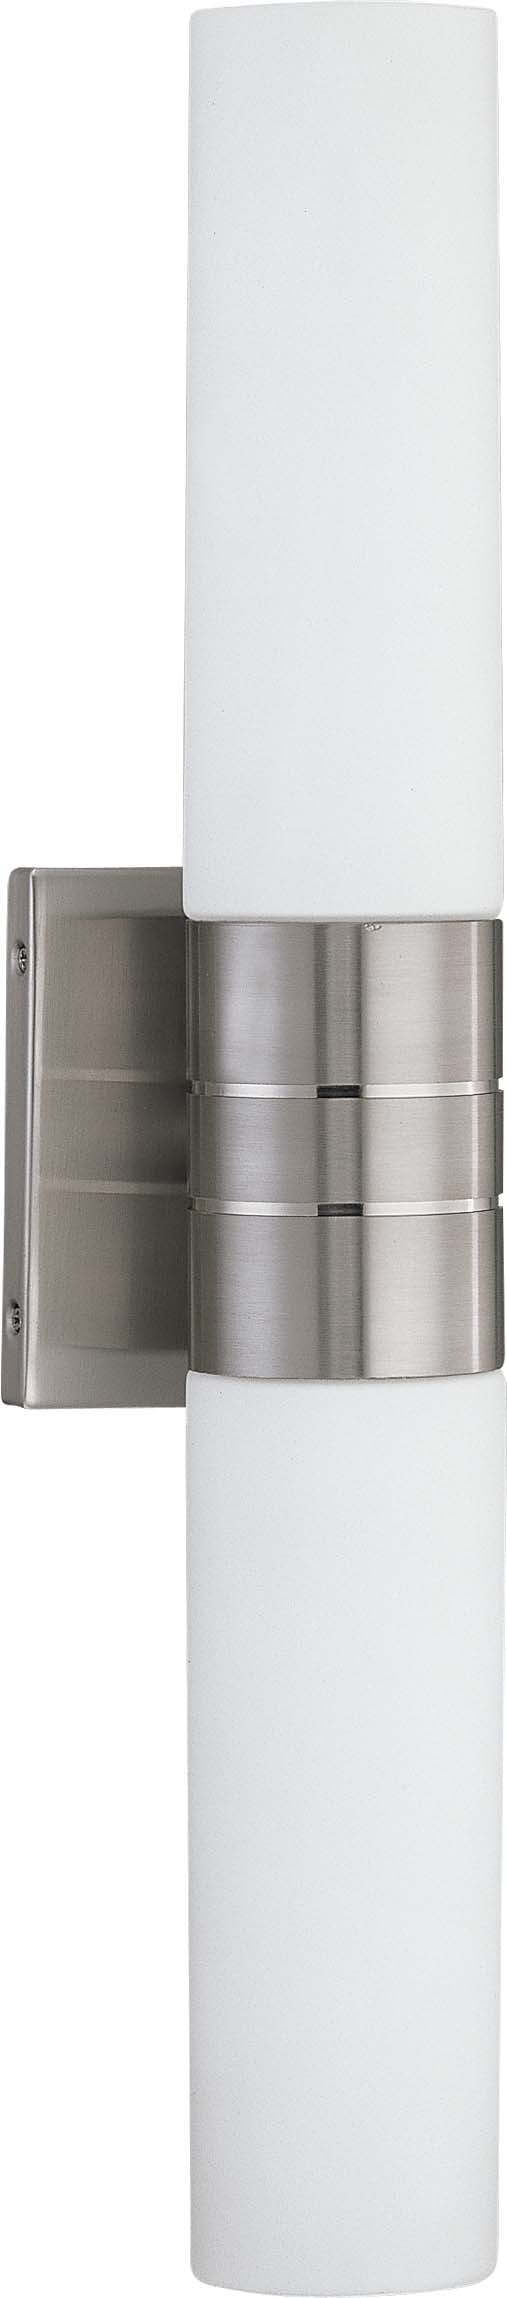 SATCO/NUVO Link 2-Light Vertical Tube Wall Sconce With White Glass (60-2936)